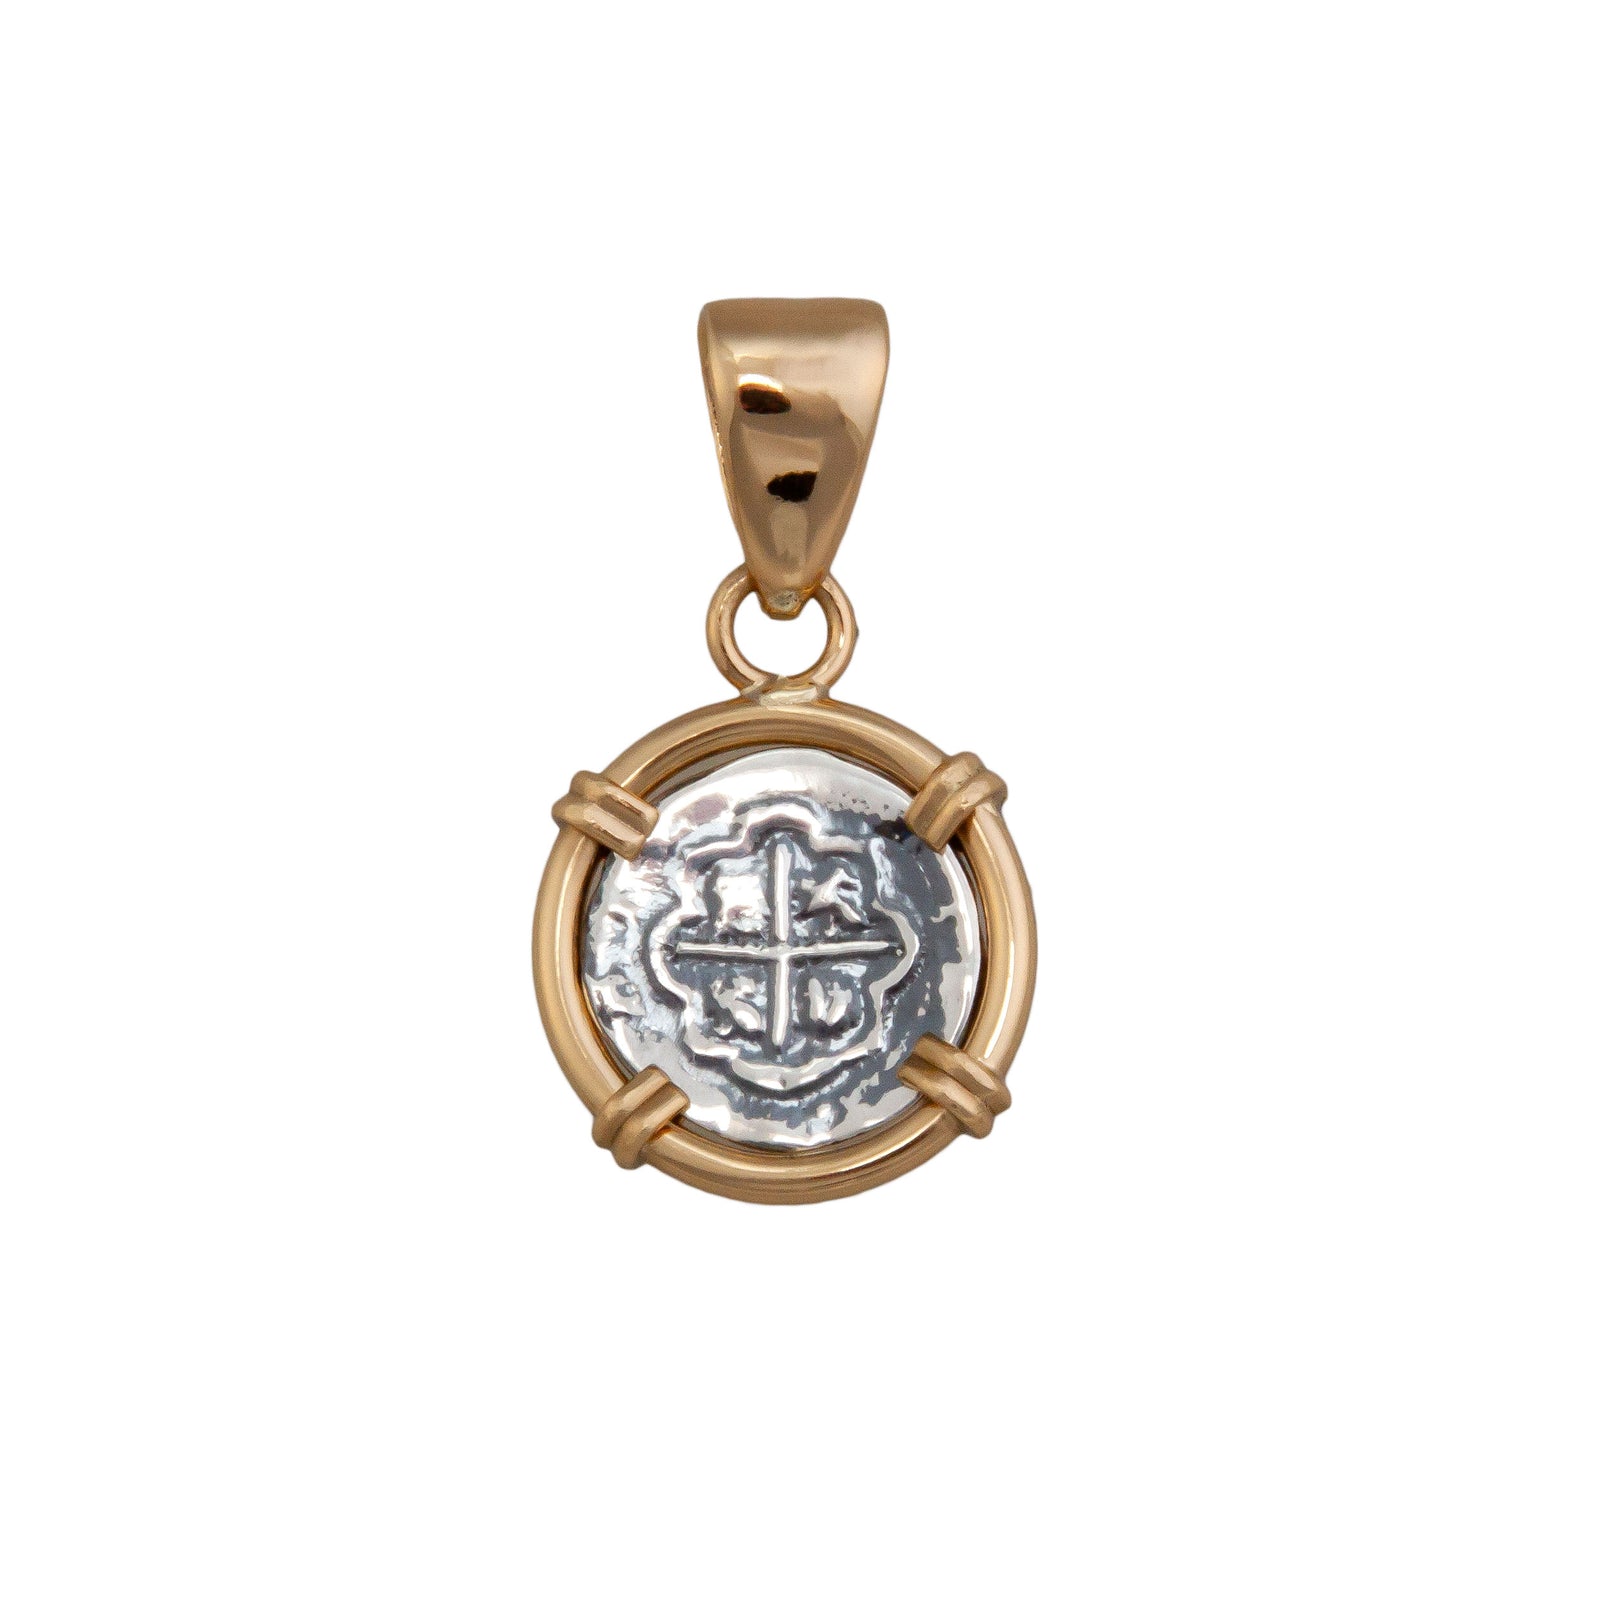 Sterling Silver and Alchemia Replica Spanish Reversible Coin Prong Pendant